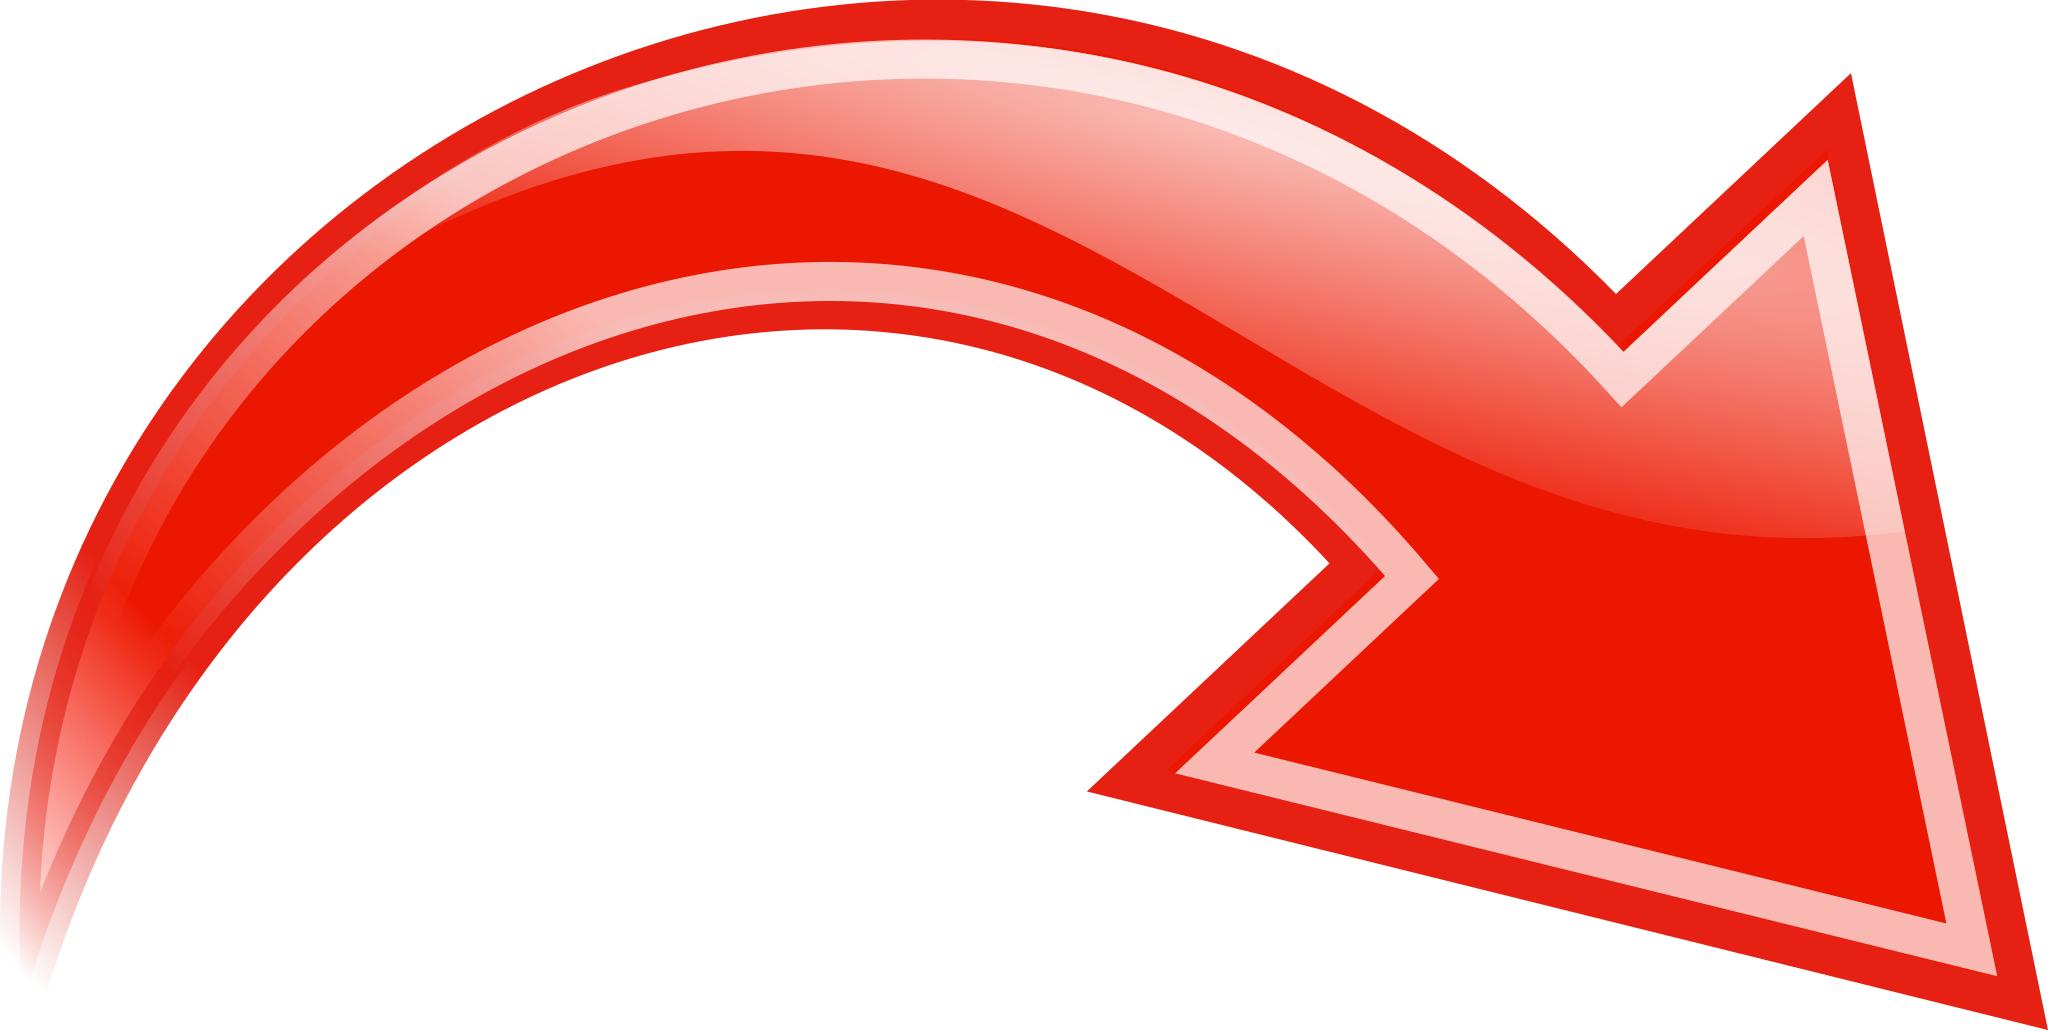 Free Images - arrow curved red right.